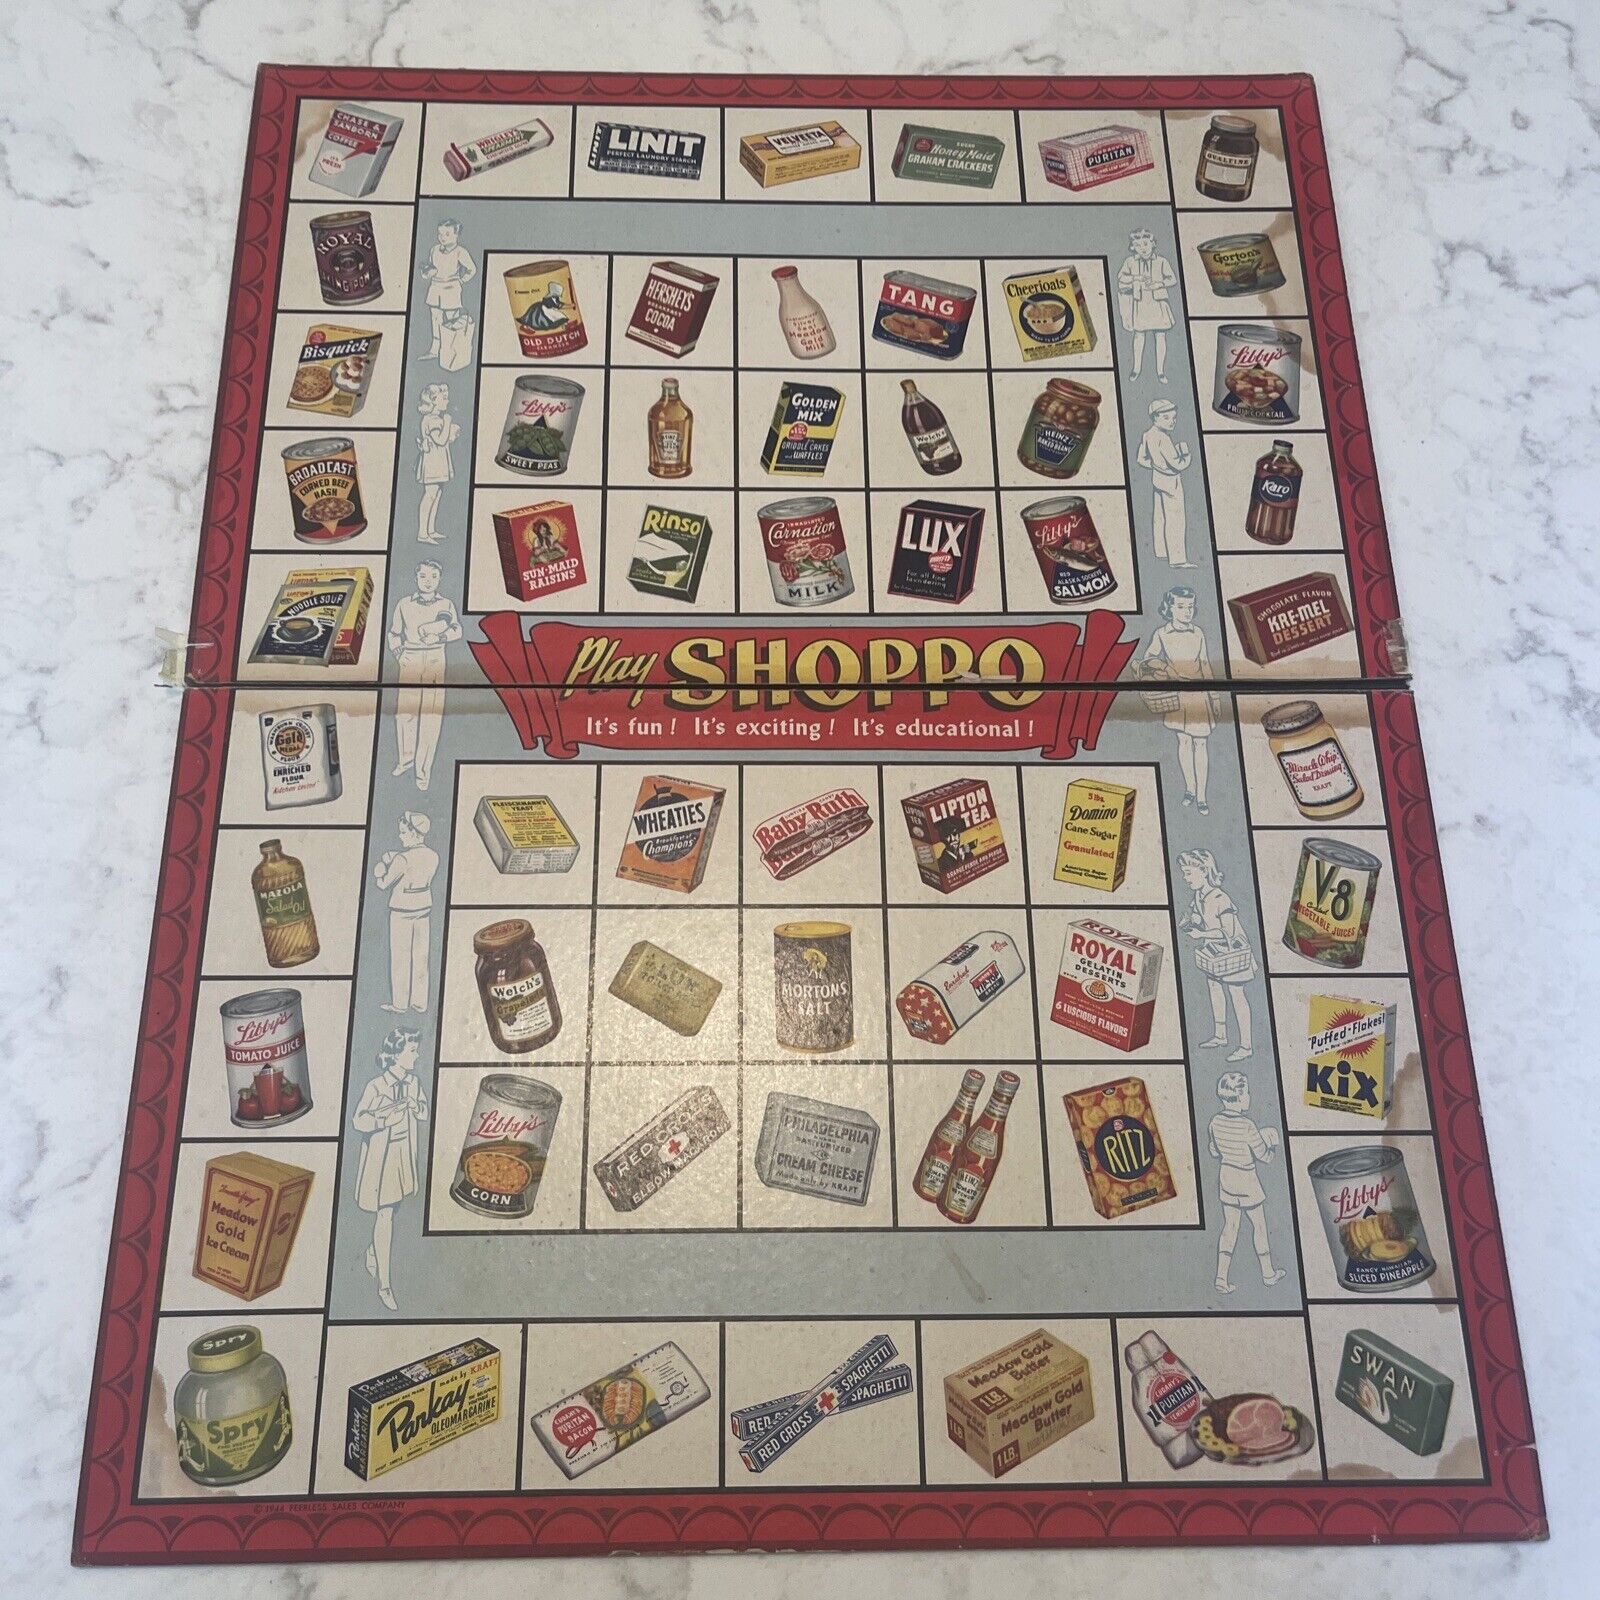 PLAY SHOPPO RARE 1944 Grocery GAME BOARD Only - Libby’s, Ritz,Welches, Hersheys